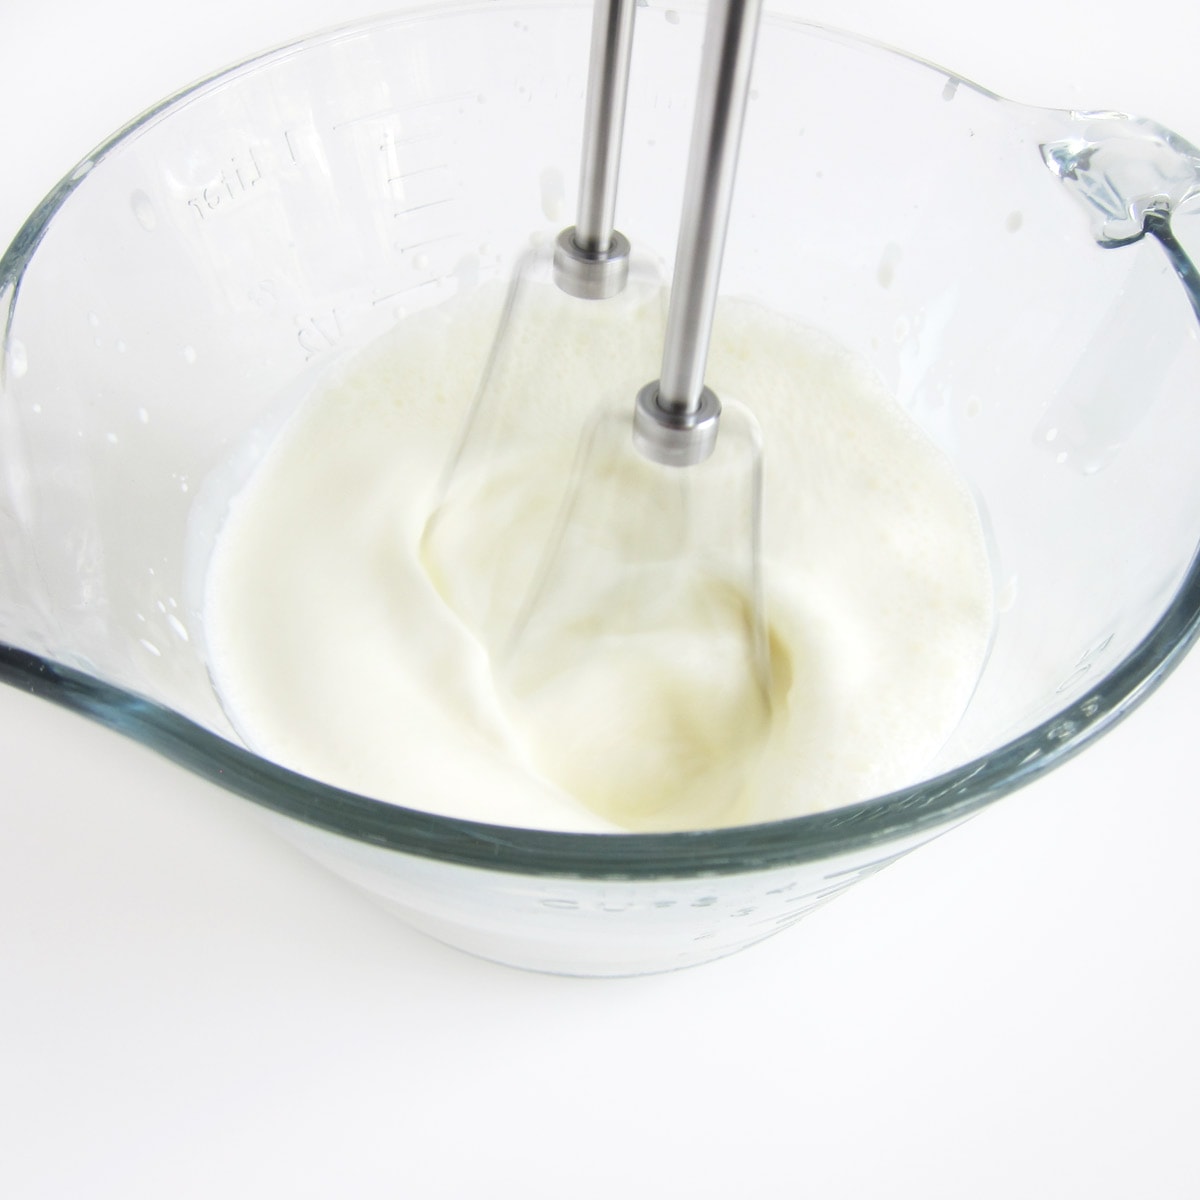 whipping cream in a mixing bowl using a hand-held mixer